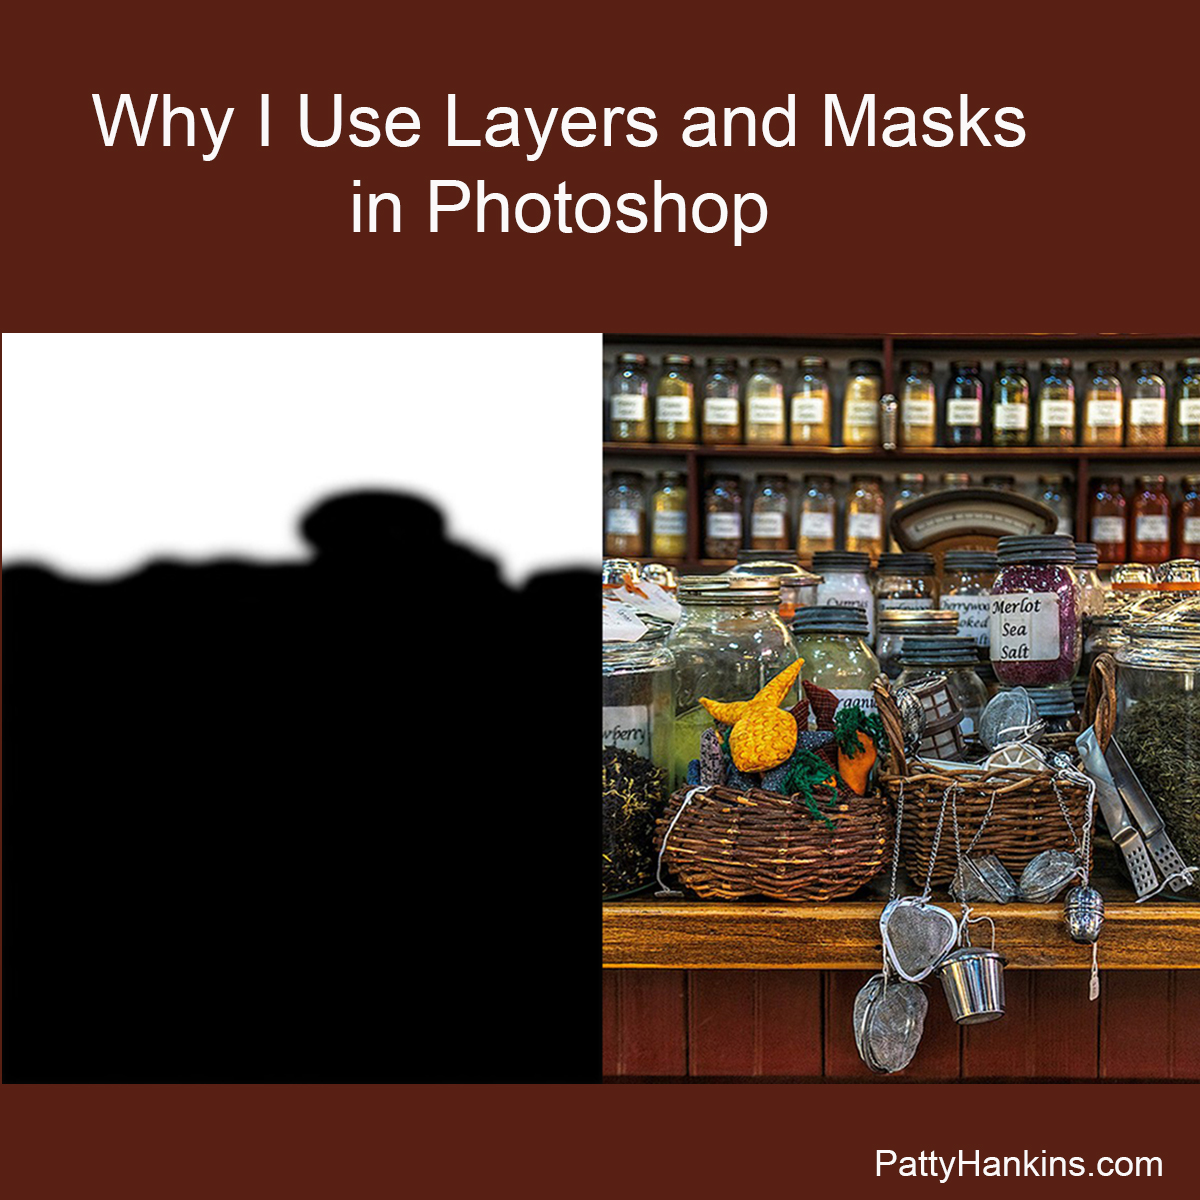 Why I Use Layers and Masks in Photoshop